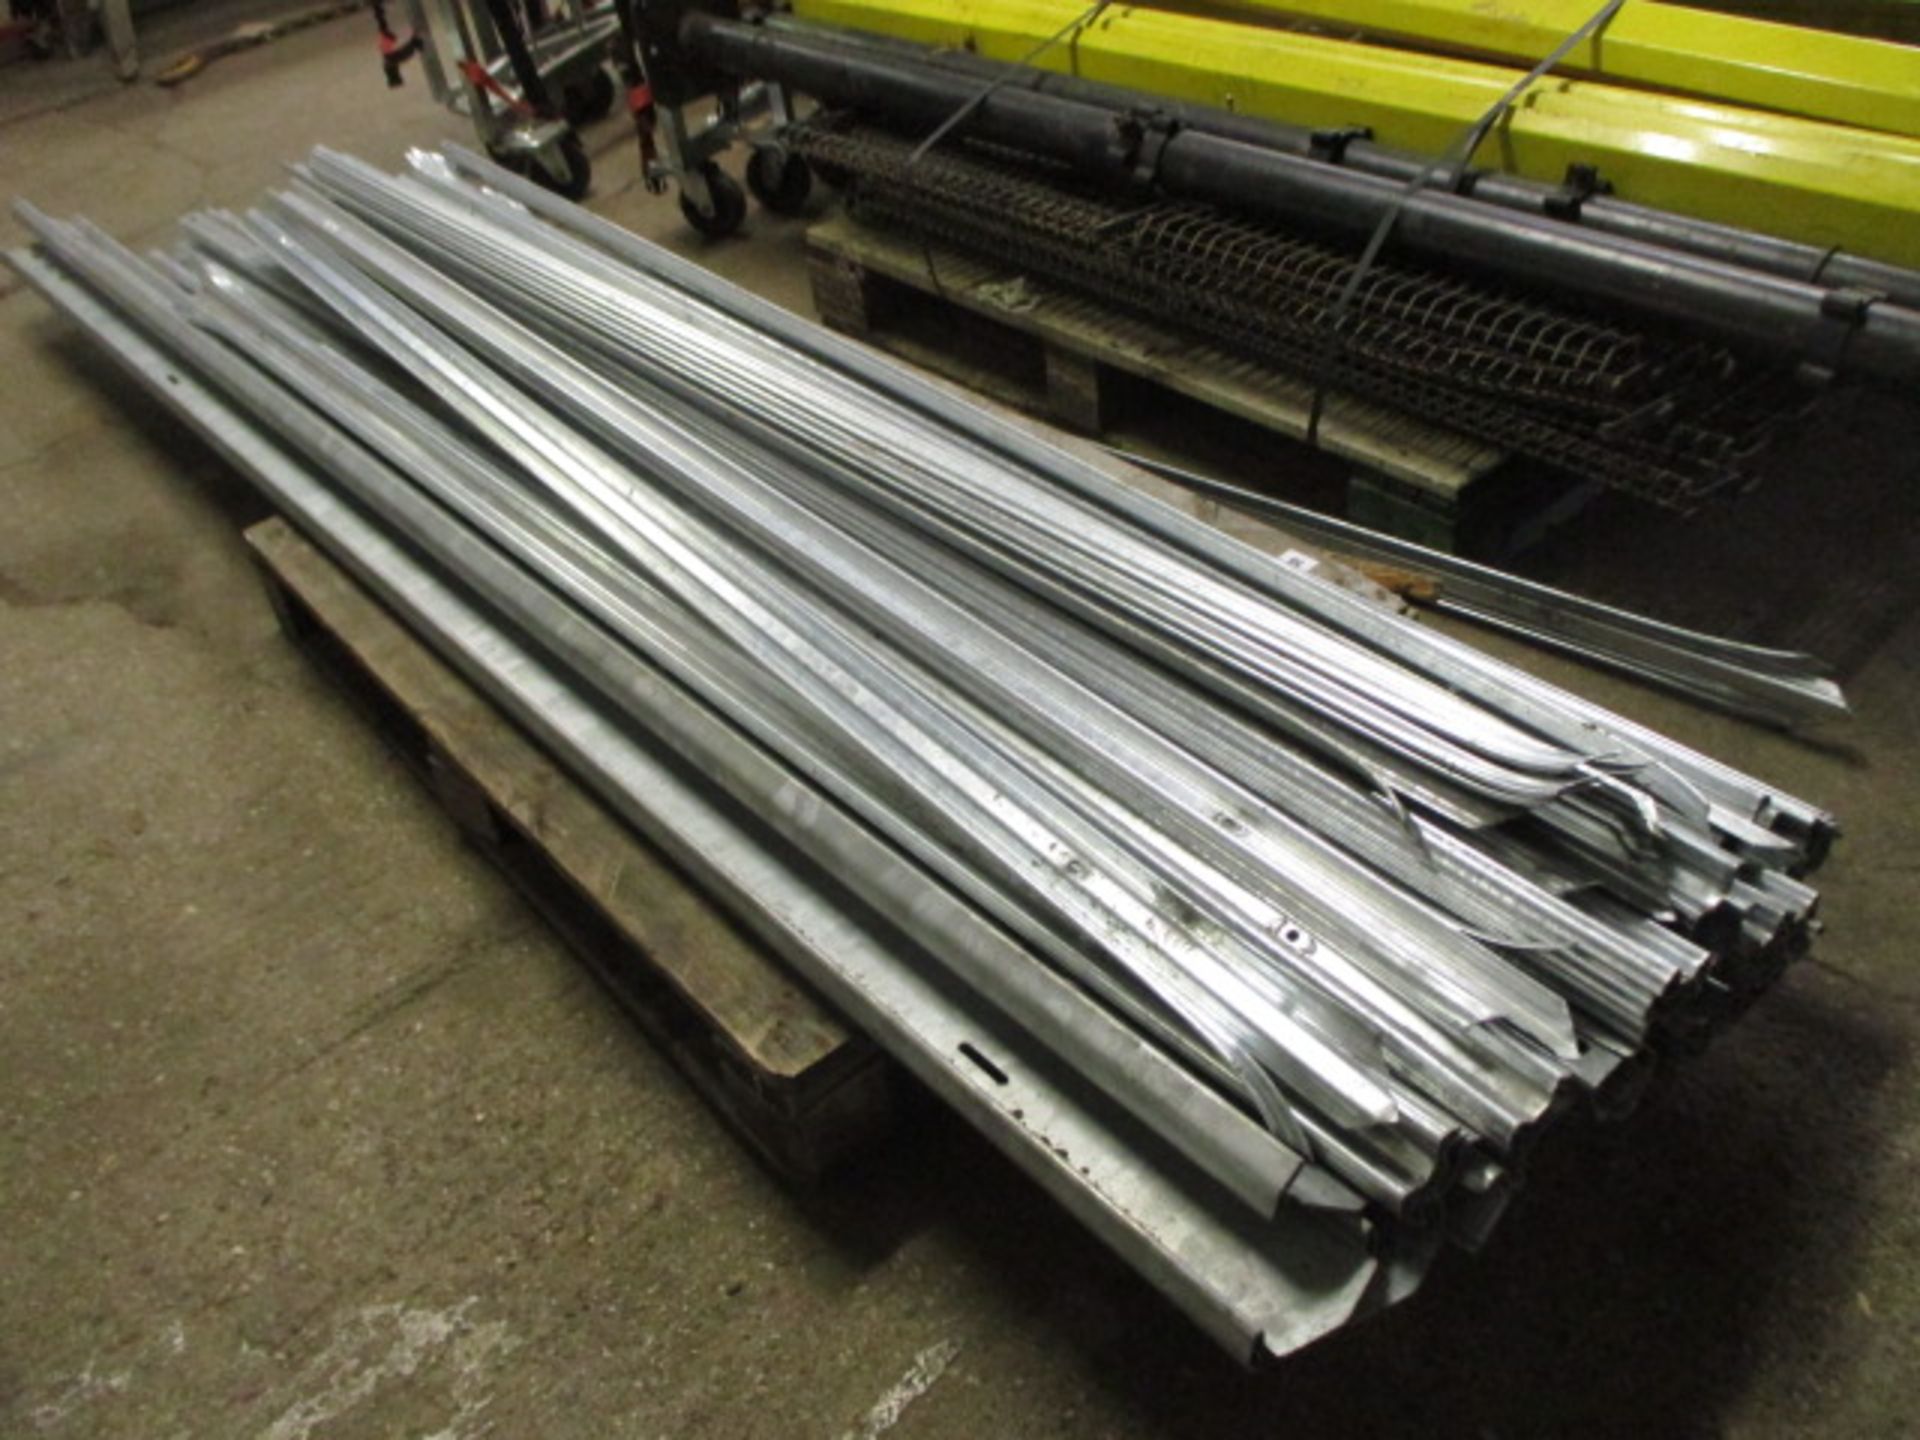 Pallet containing palisade galvanized fencing, approx. 9m length